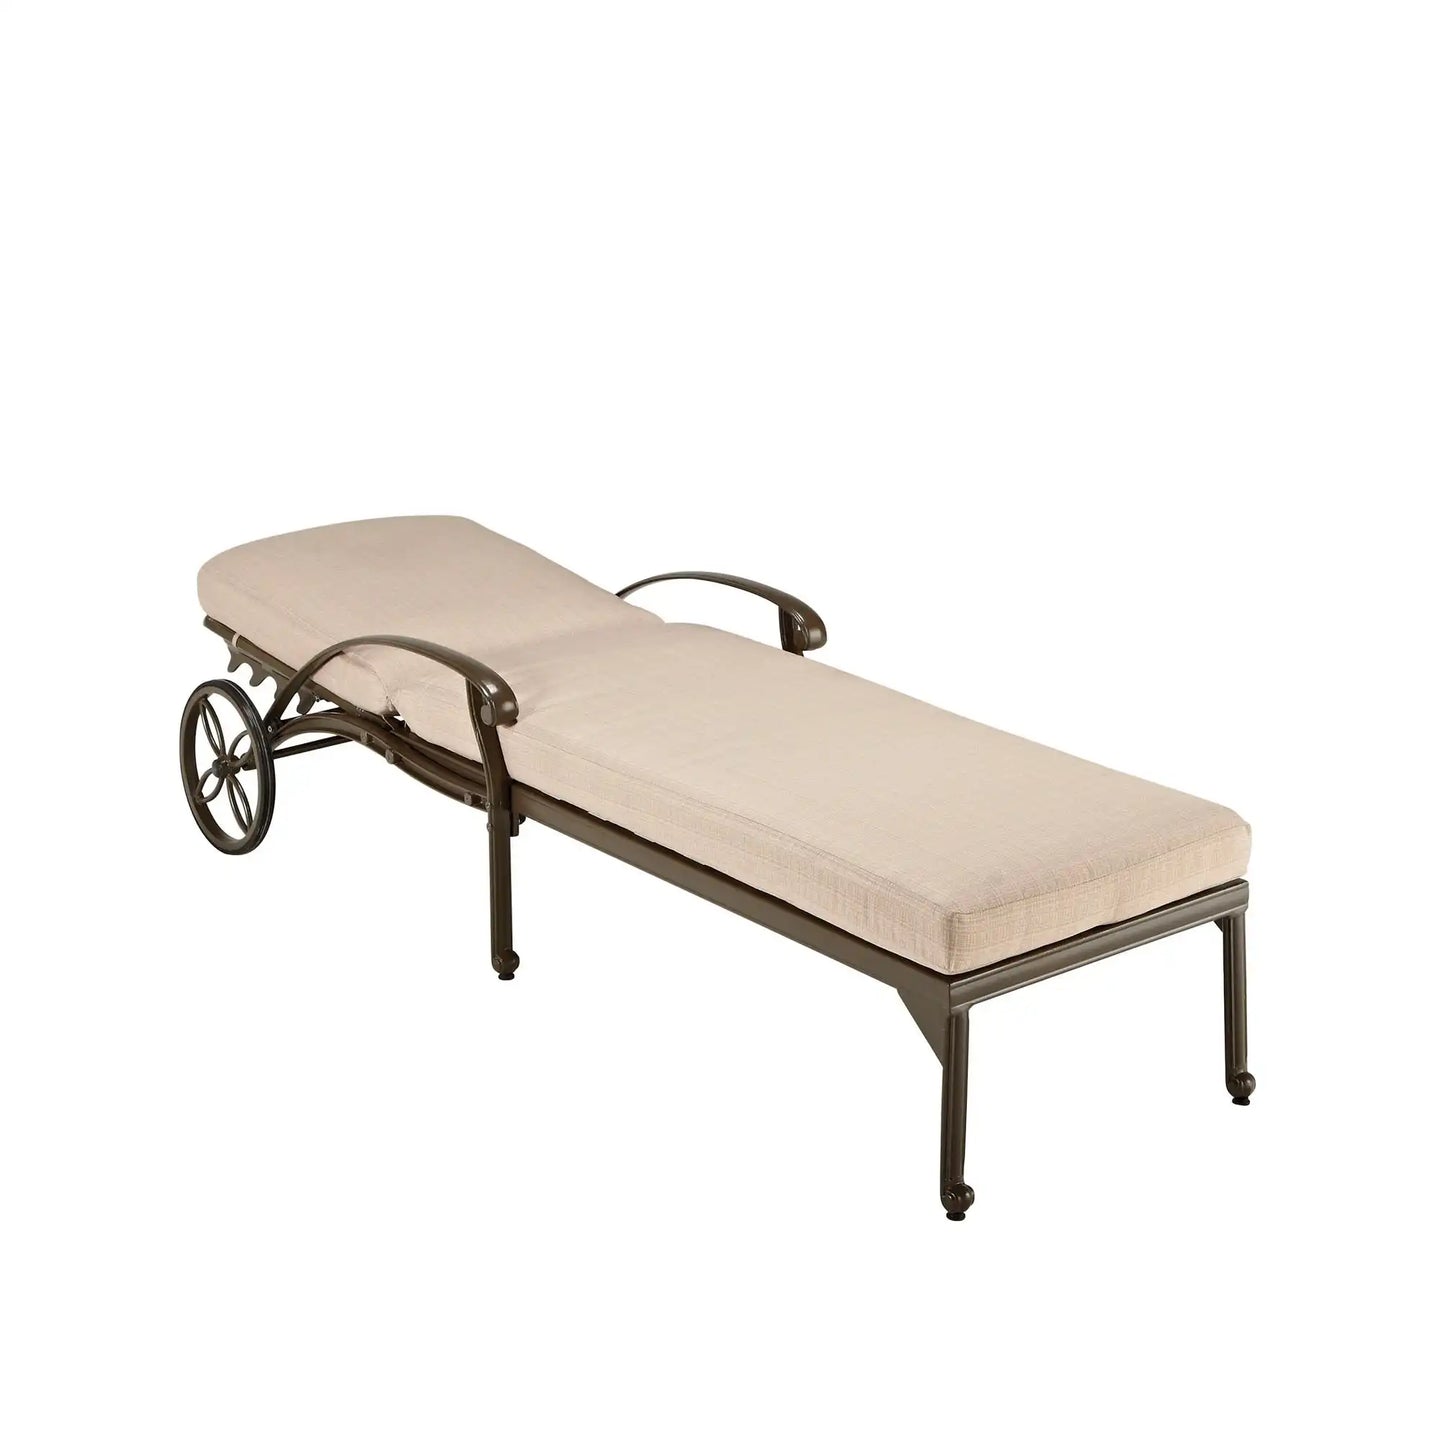 Homestyles Capri Taupe Outdoor Chaise Lounge